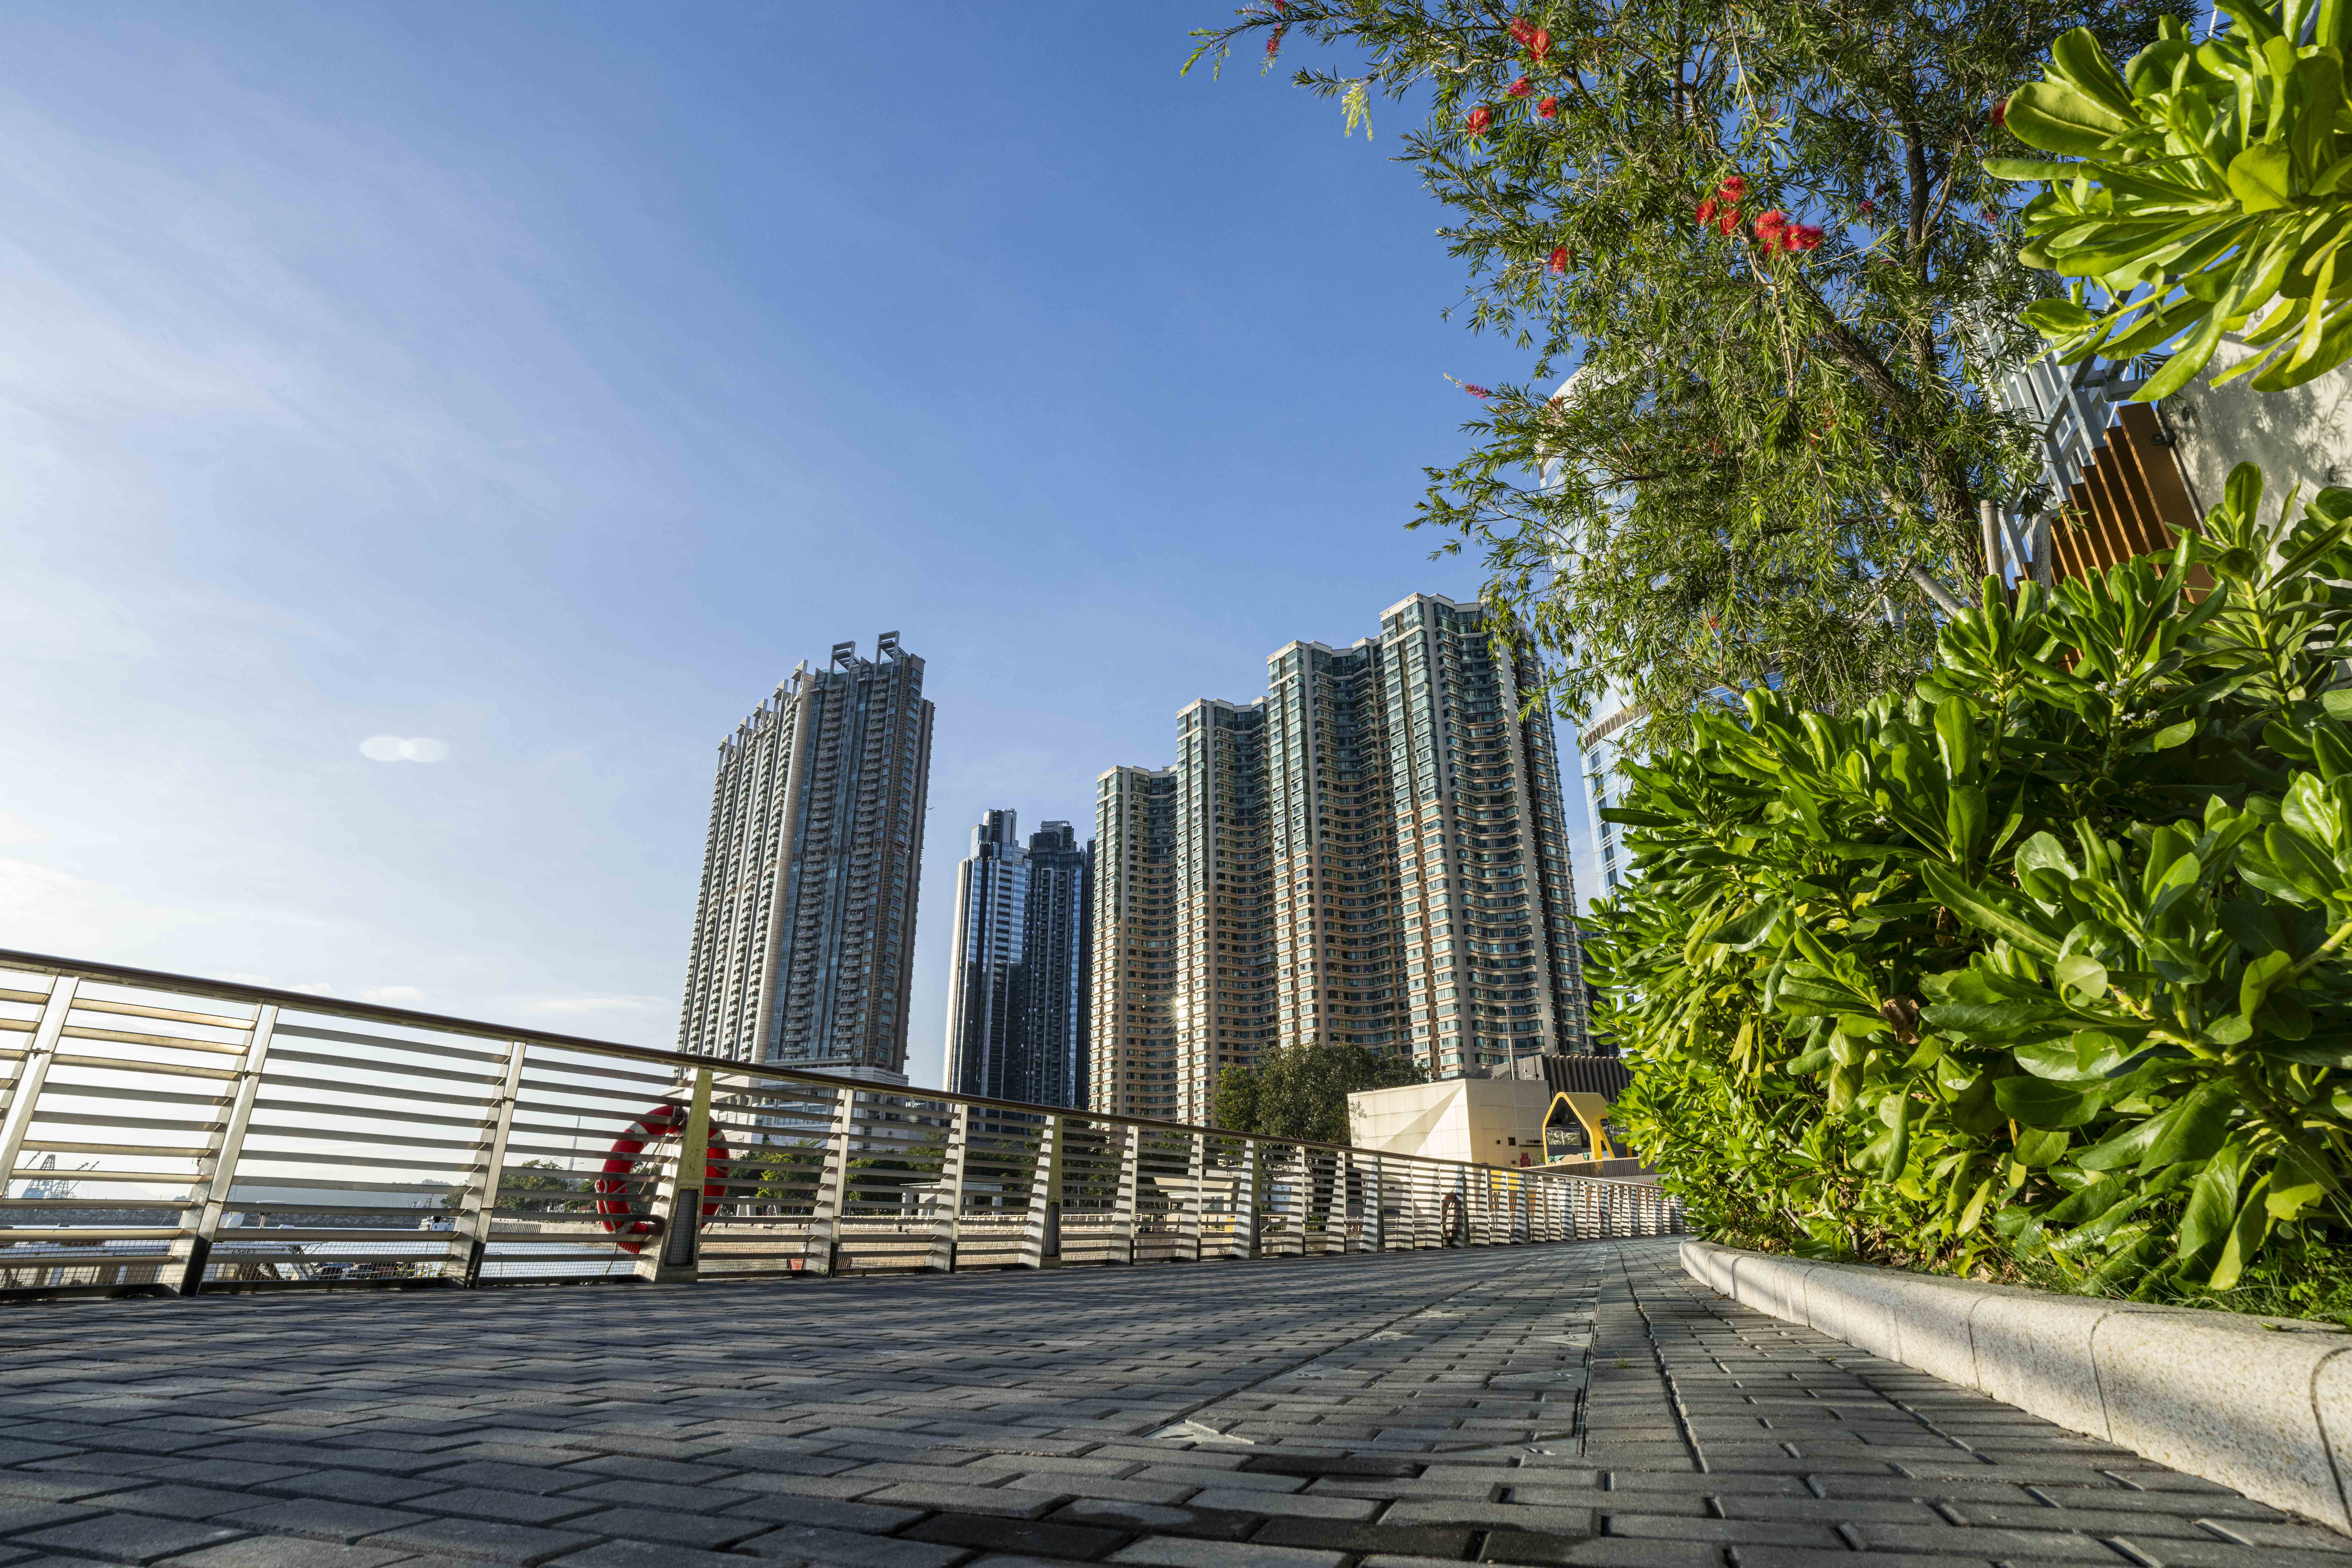 The Hoi Fai Road Promenade in Tai Kok Tsui is open for public use from today (December 21). The newly extended section of the Hoi Fai Road Promenade covers an area of about 360 square metres, and provides benches and green spaces.